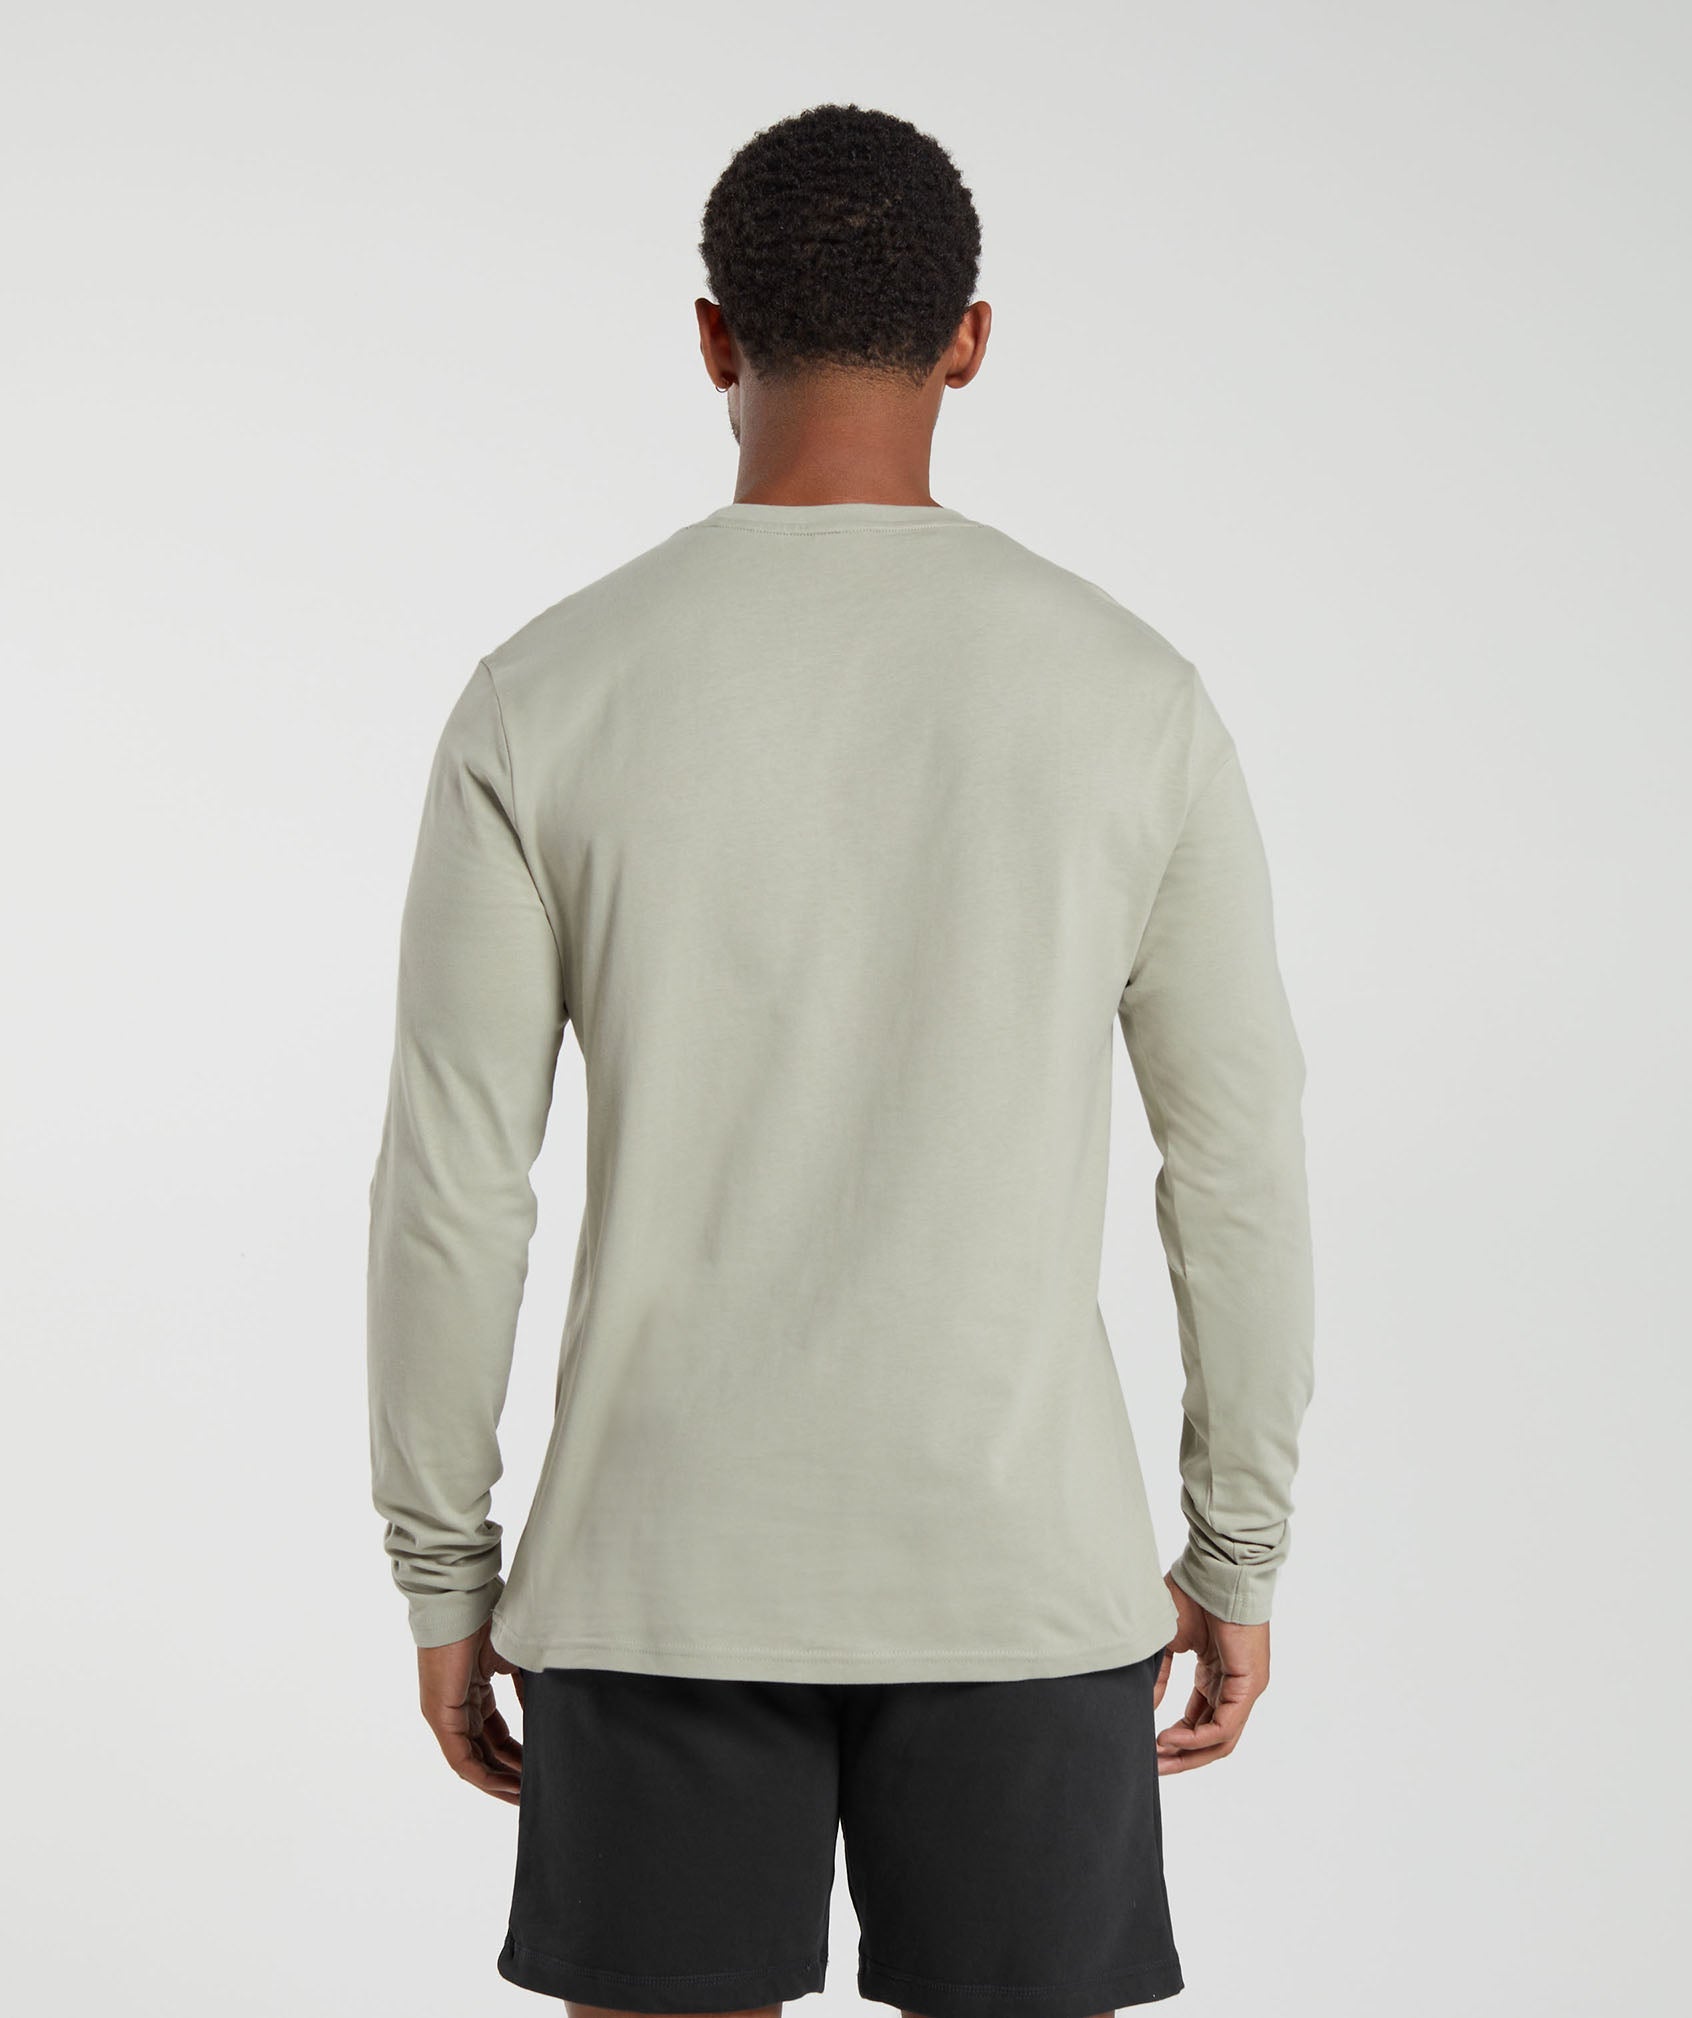 Crest Long Sleeve T-Shirt in Stone Grey - view 2